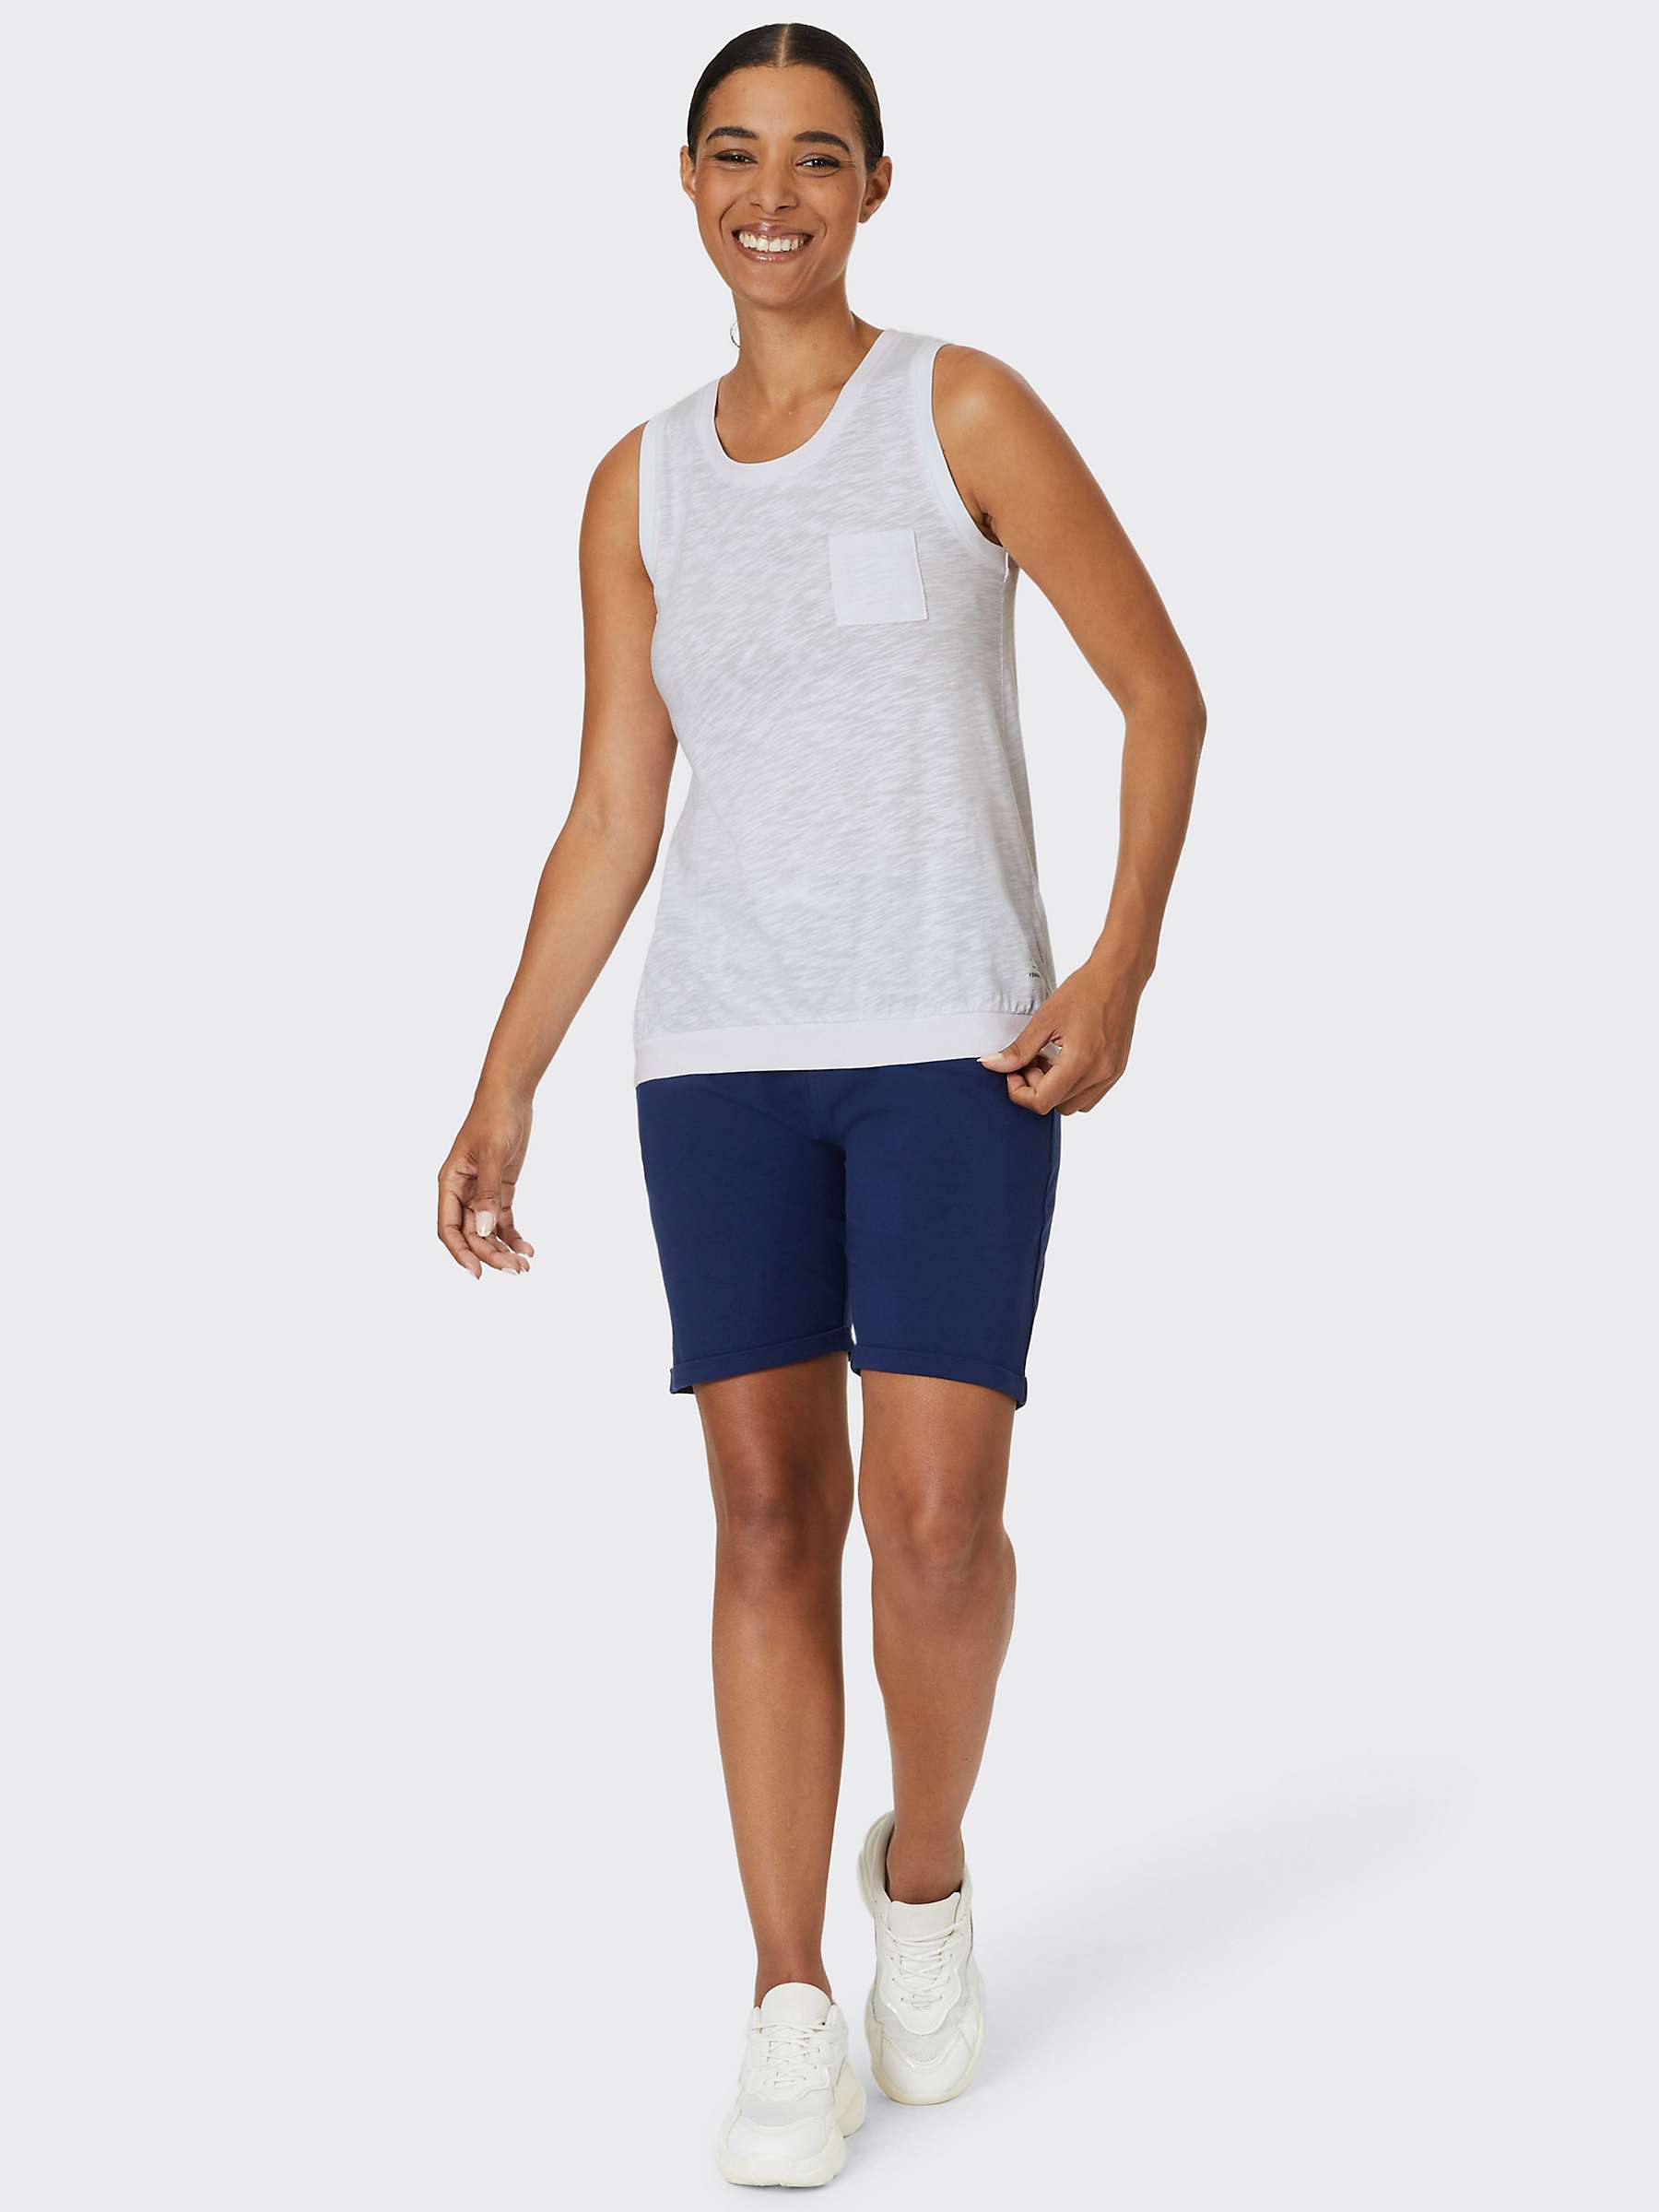 Buy Venice Beach Remy Tank Top, White Online at johnlewis.com